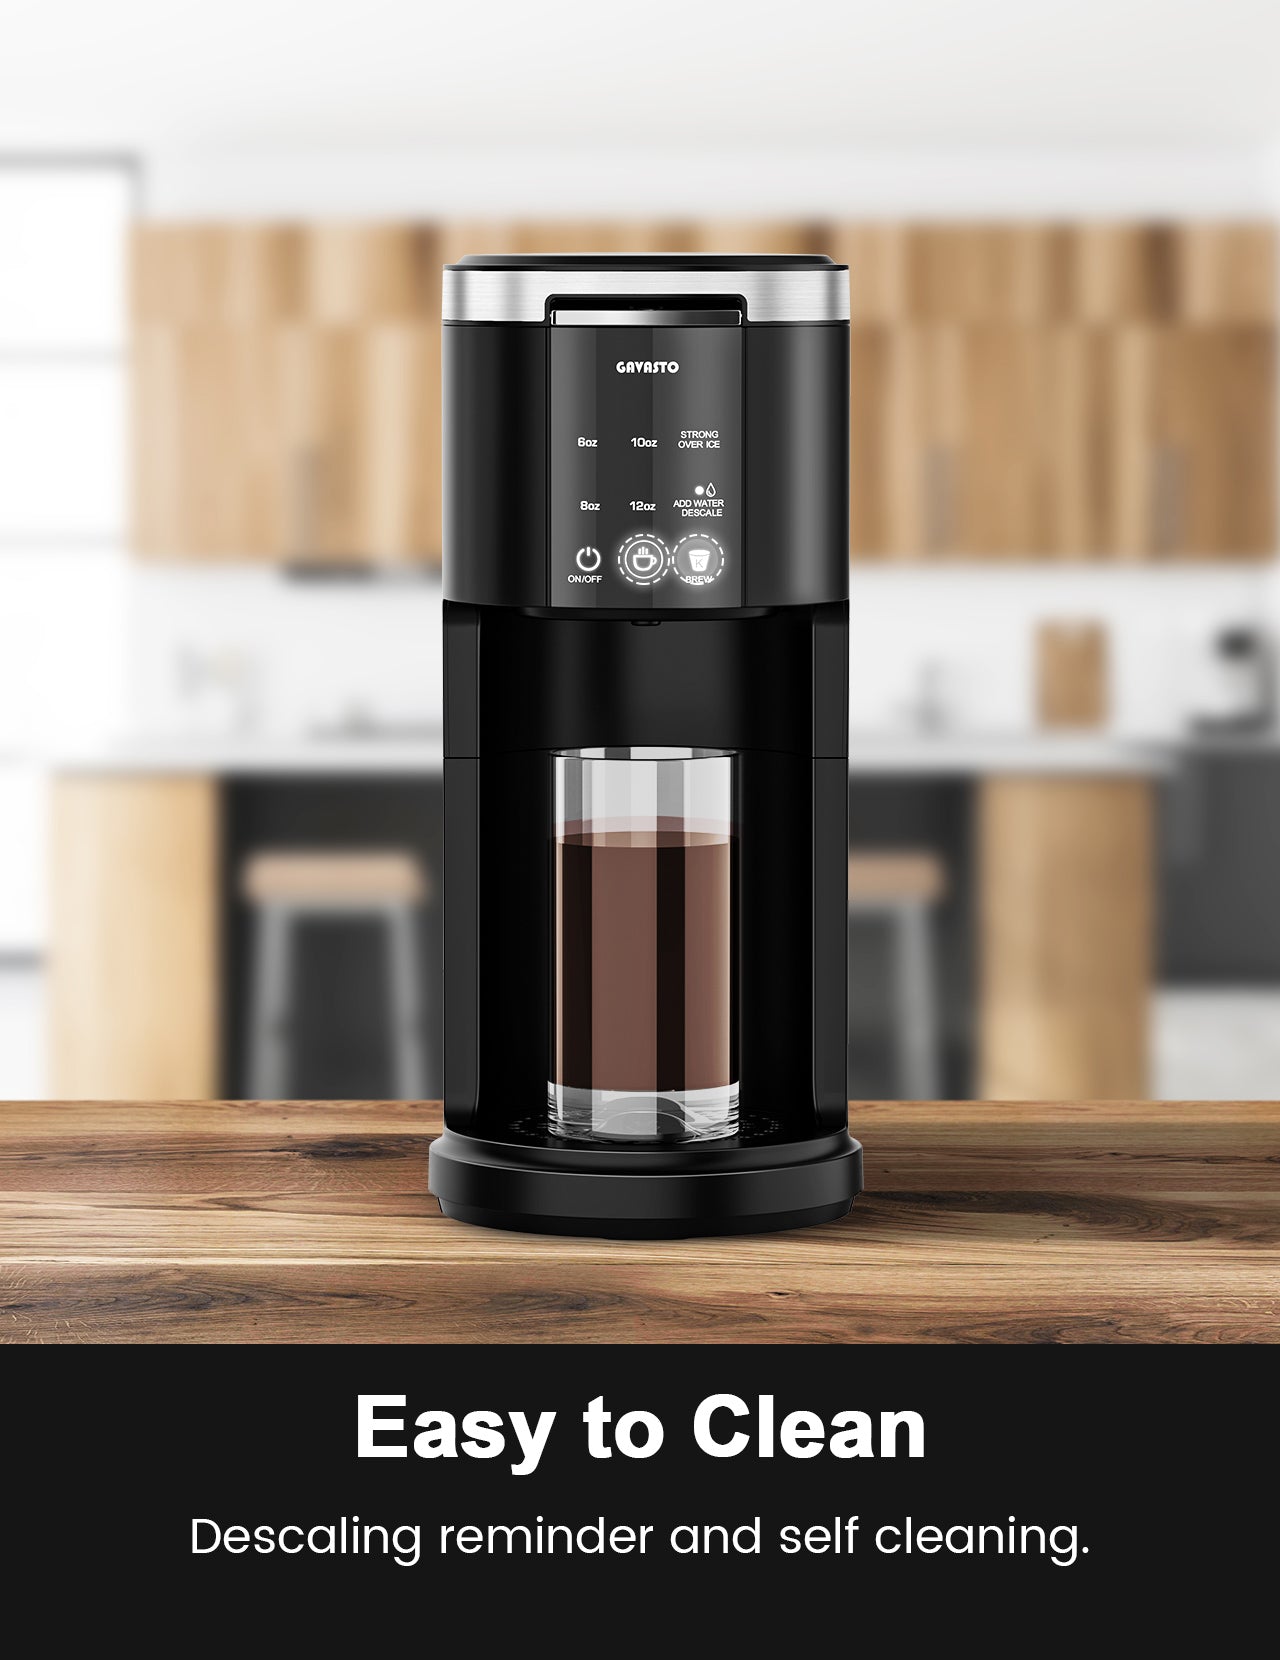 GAVASTO Pods & Grounds Single-Serve Coffee Maker, K-Cup Pod Compatible, Hot and Iced Coffee Maker with 40-oz. Reservoir, 6 to 12 oz. Cup Size, Descaling Reminder and Self Cleaning, Strong Brew Modes